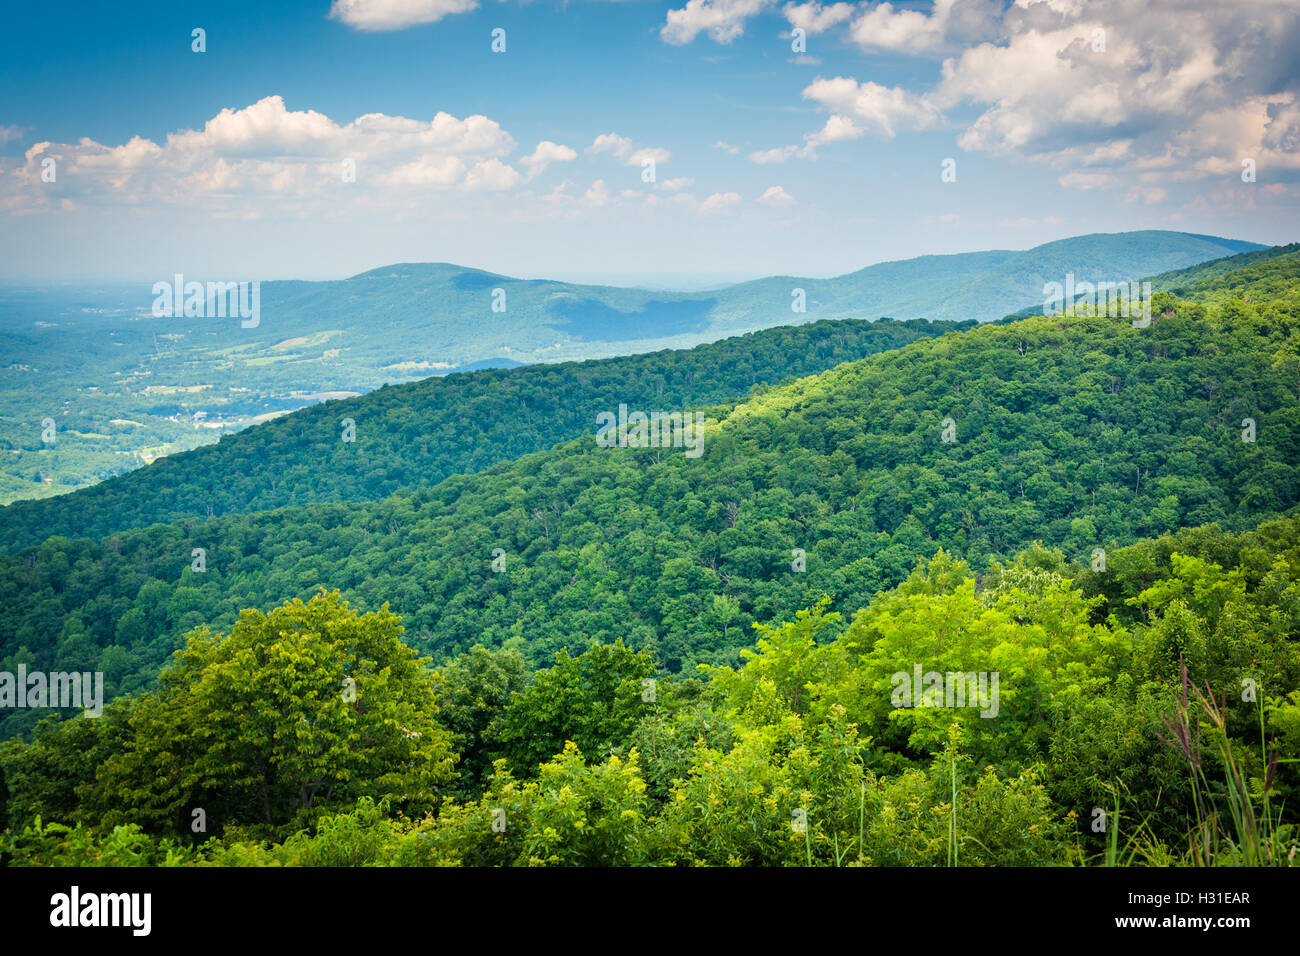 View of the Blue Ridge Mountains and Shenandoah Valley, from Skyline Drive in Shenandoah National Park, Virginia. Stock Photo